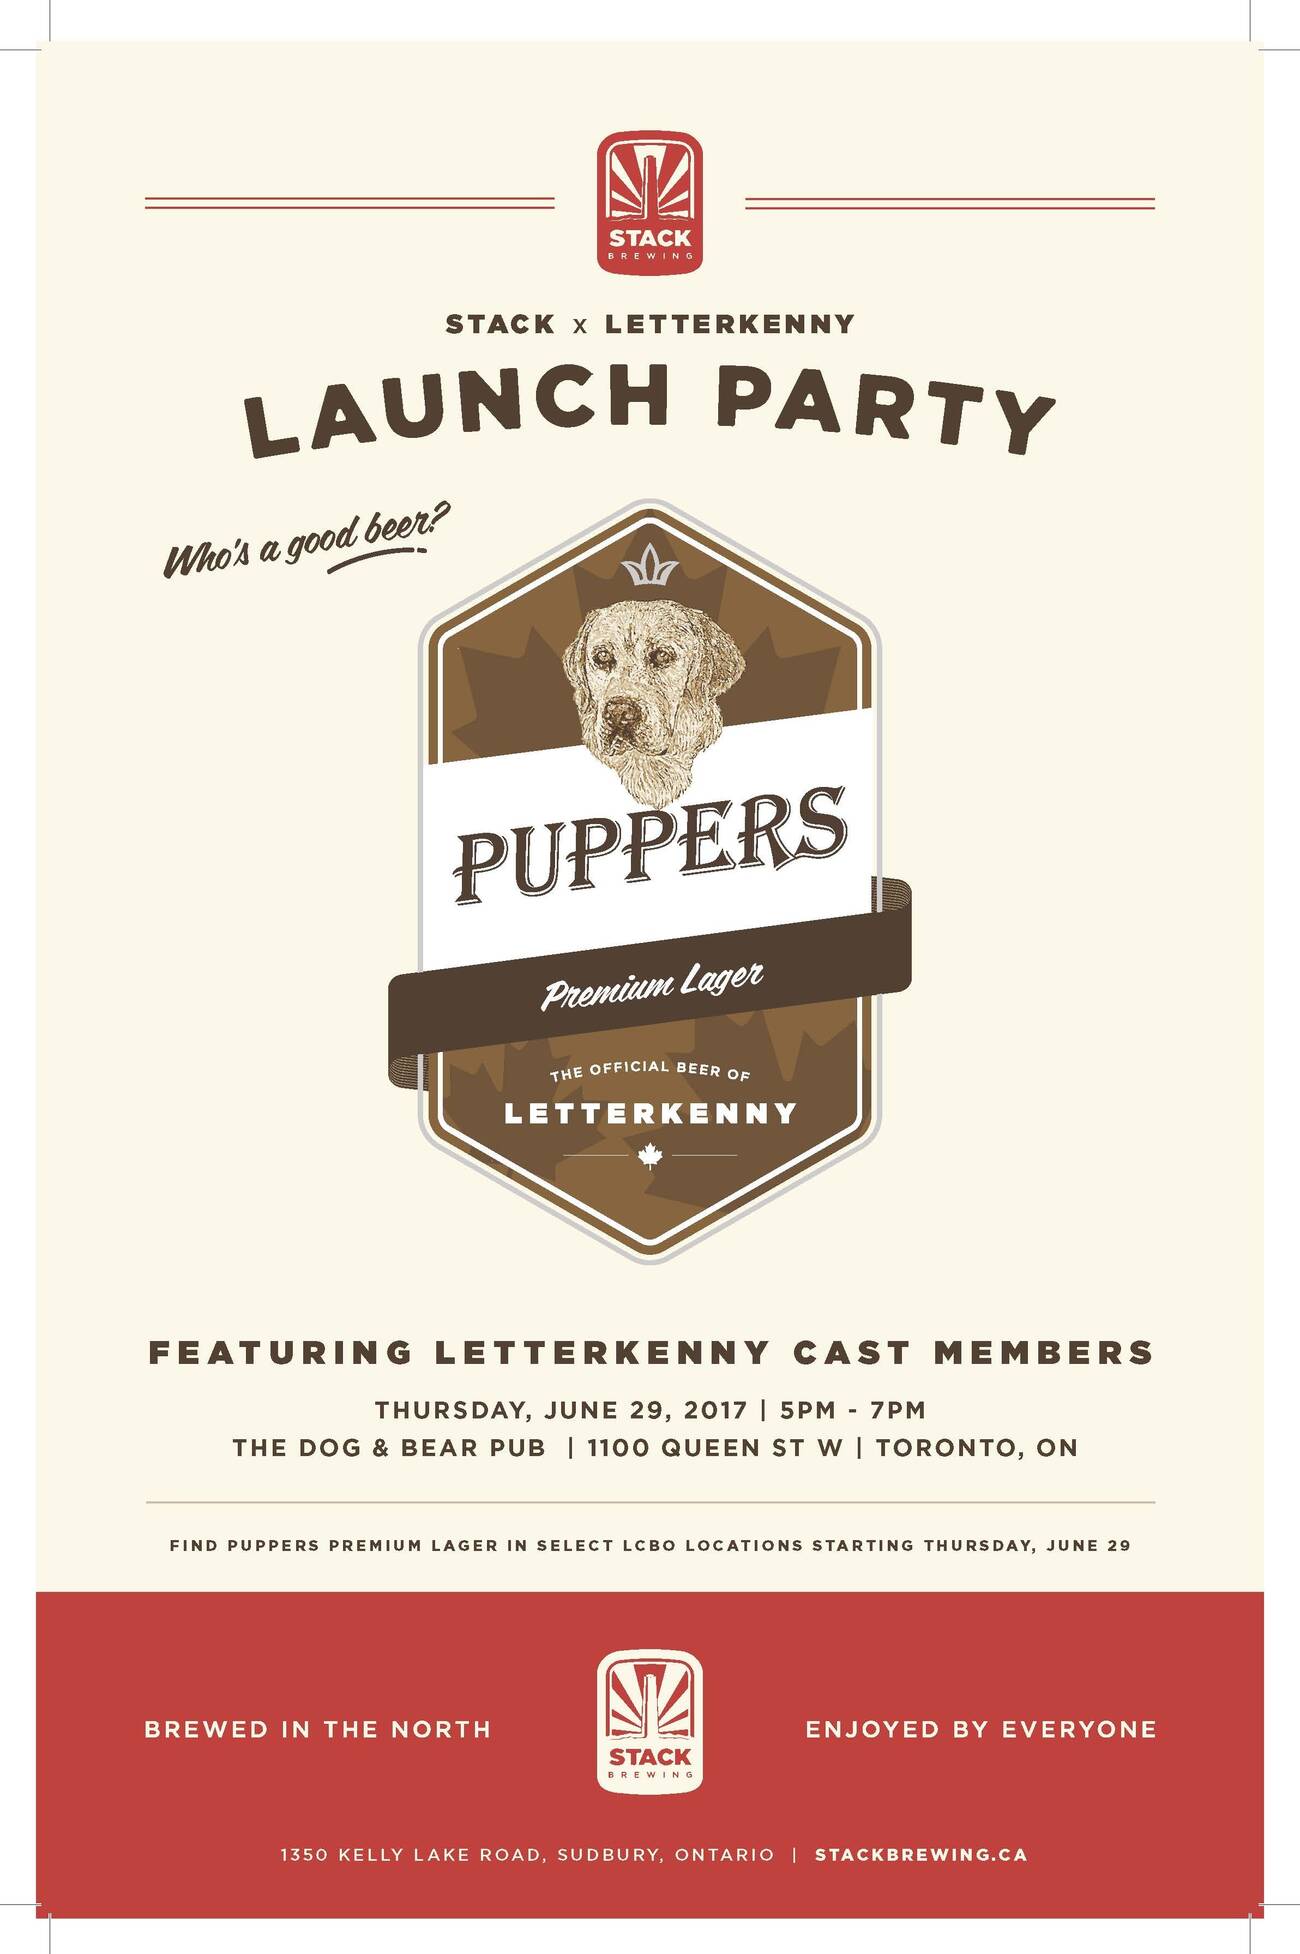 Stack x Letterkenny Present Puppers Premium Lager Launch Event